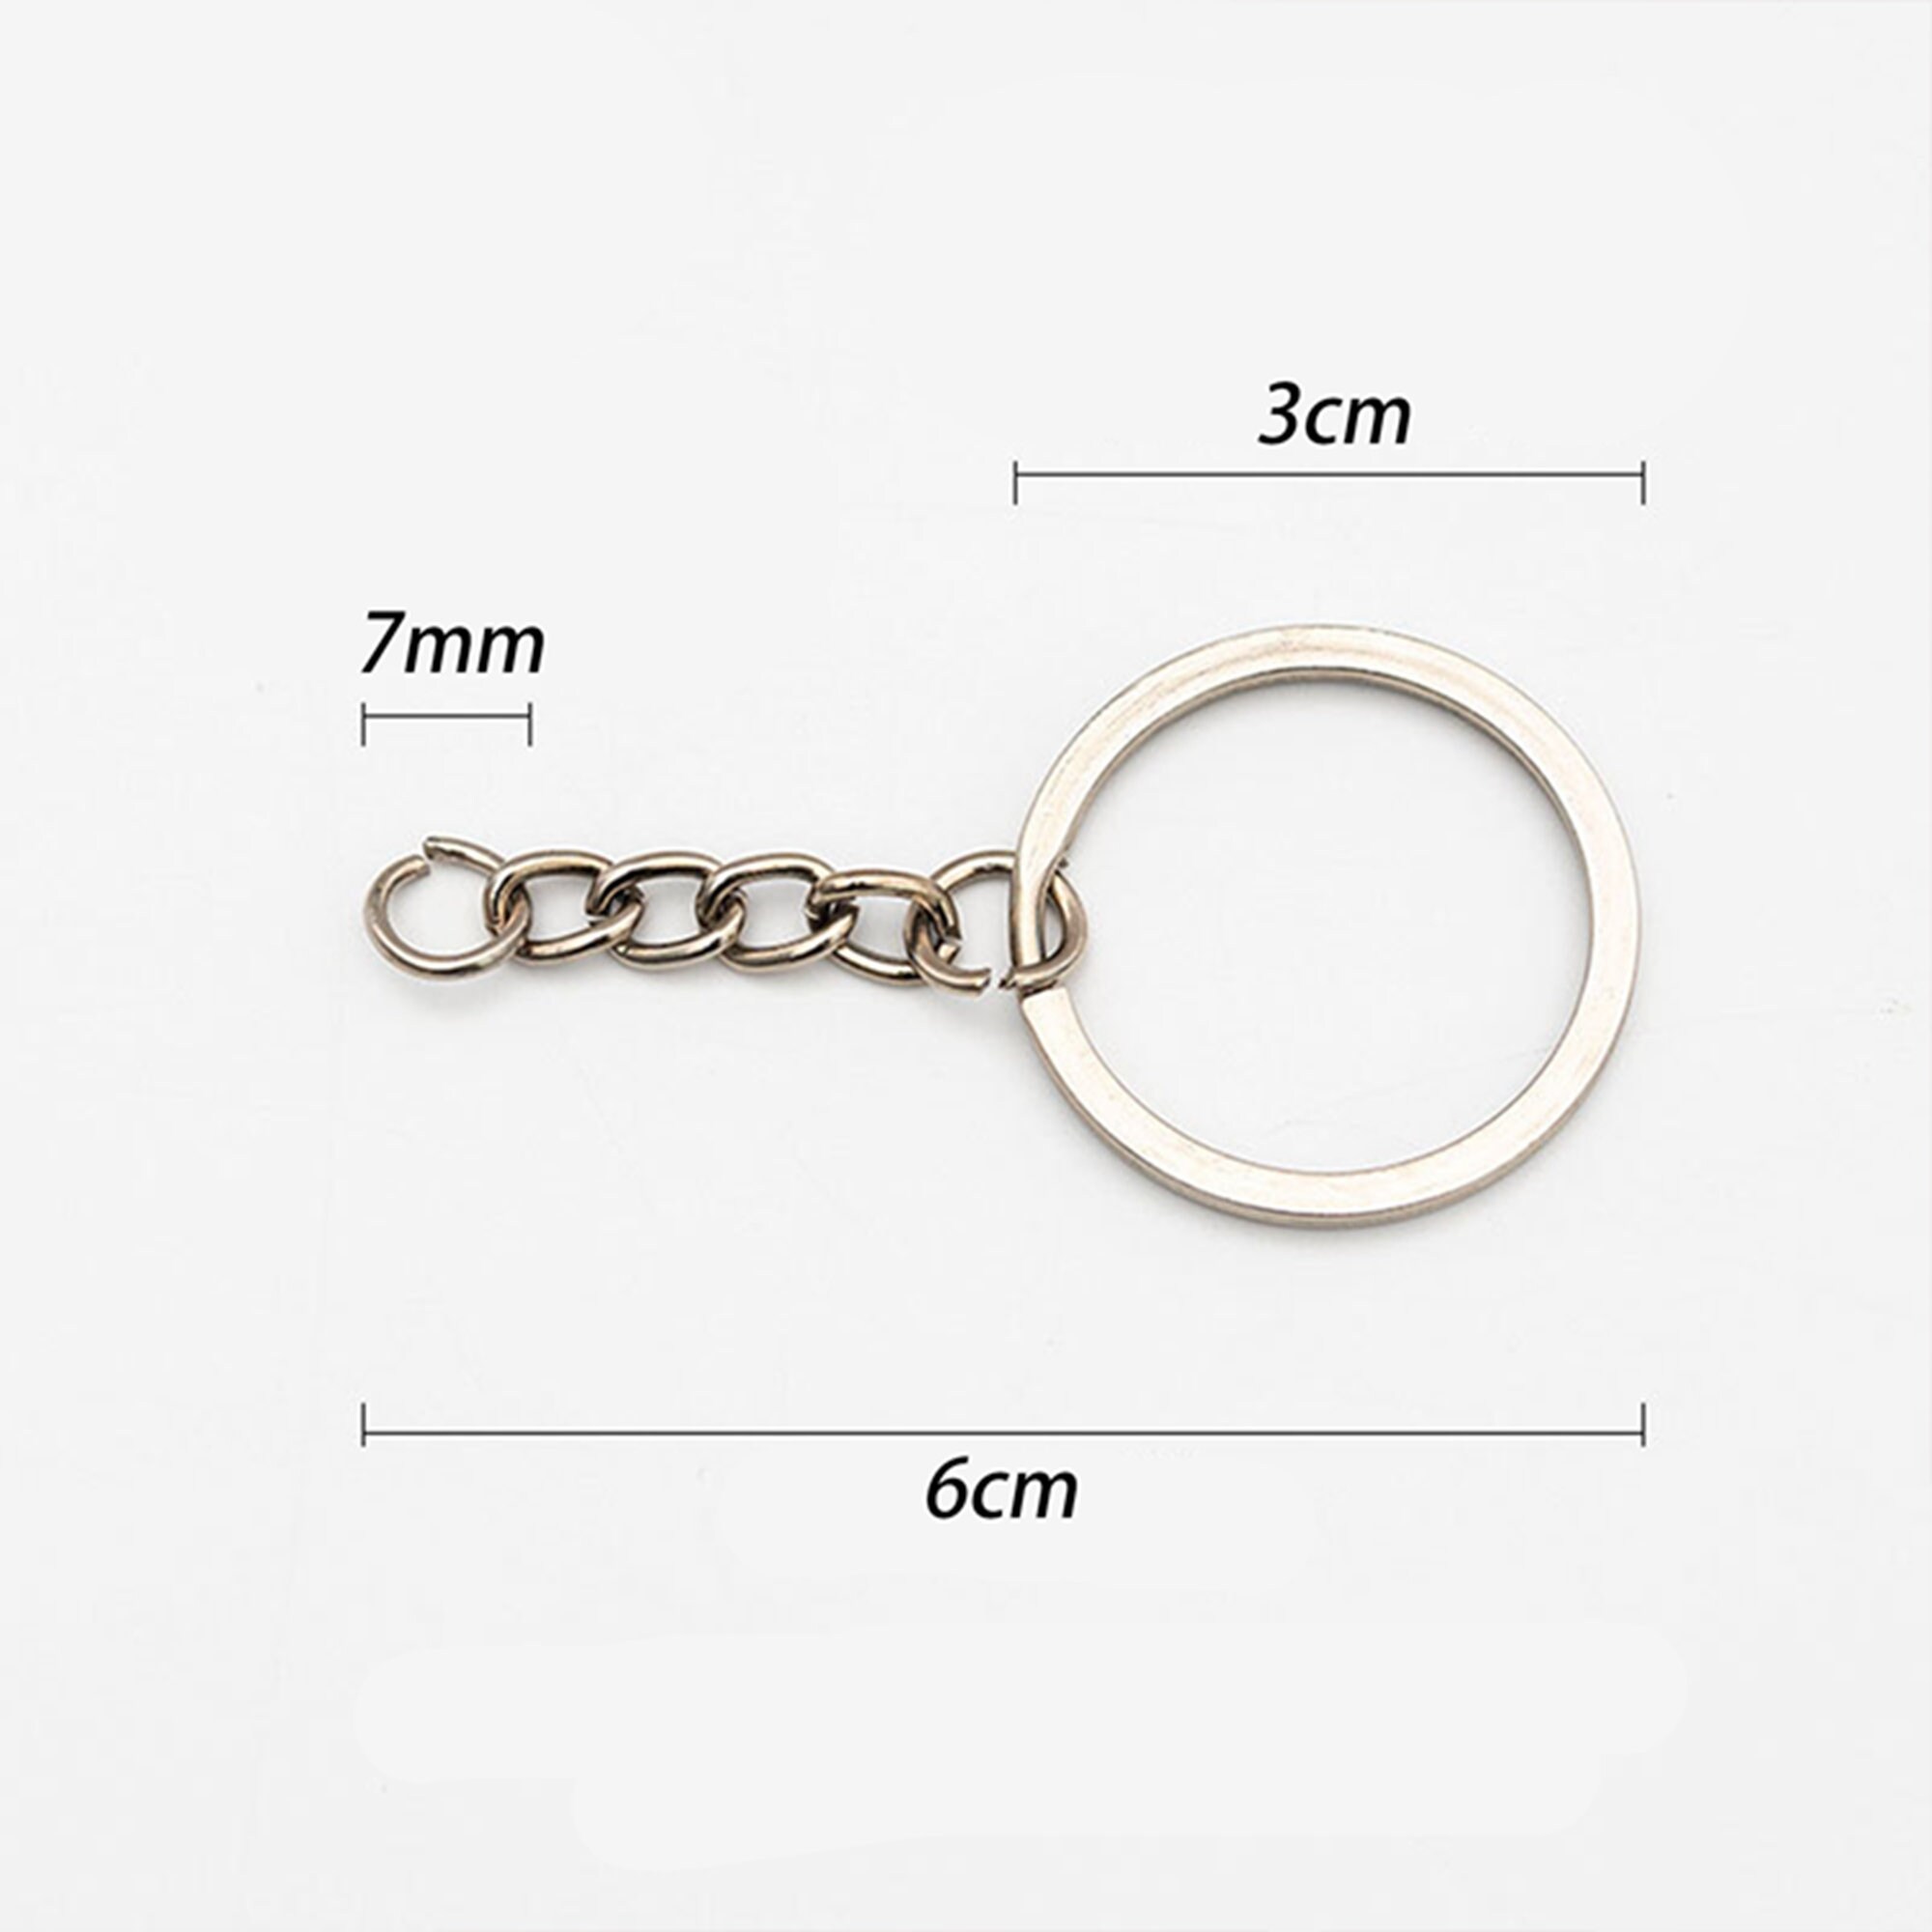 ShopTheNerdyBirdy Bulk Key Ring with Chain and Jump Ring, Nickel Plated Key Chains, Wholesale Keychains